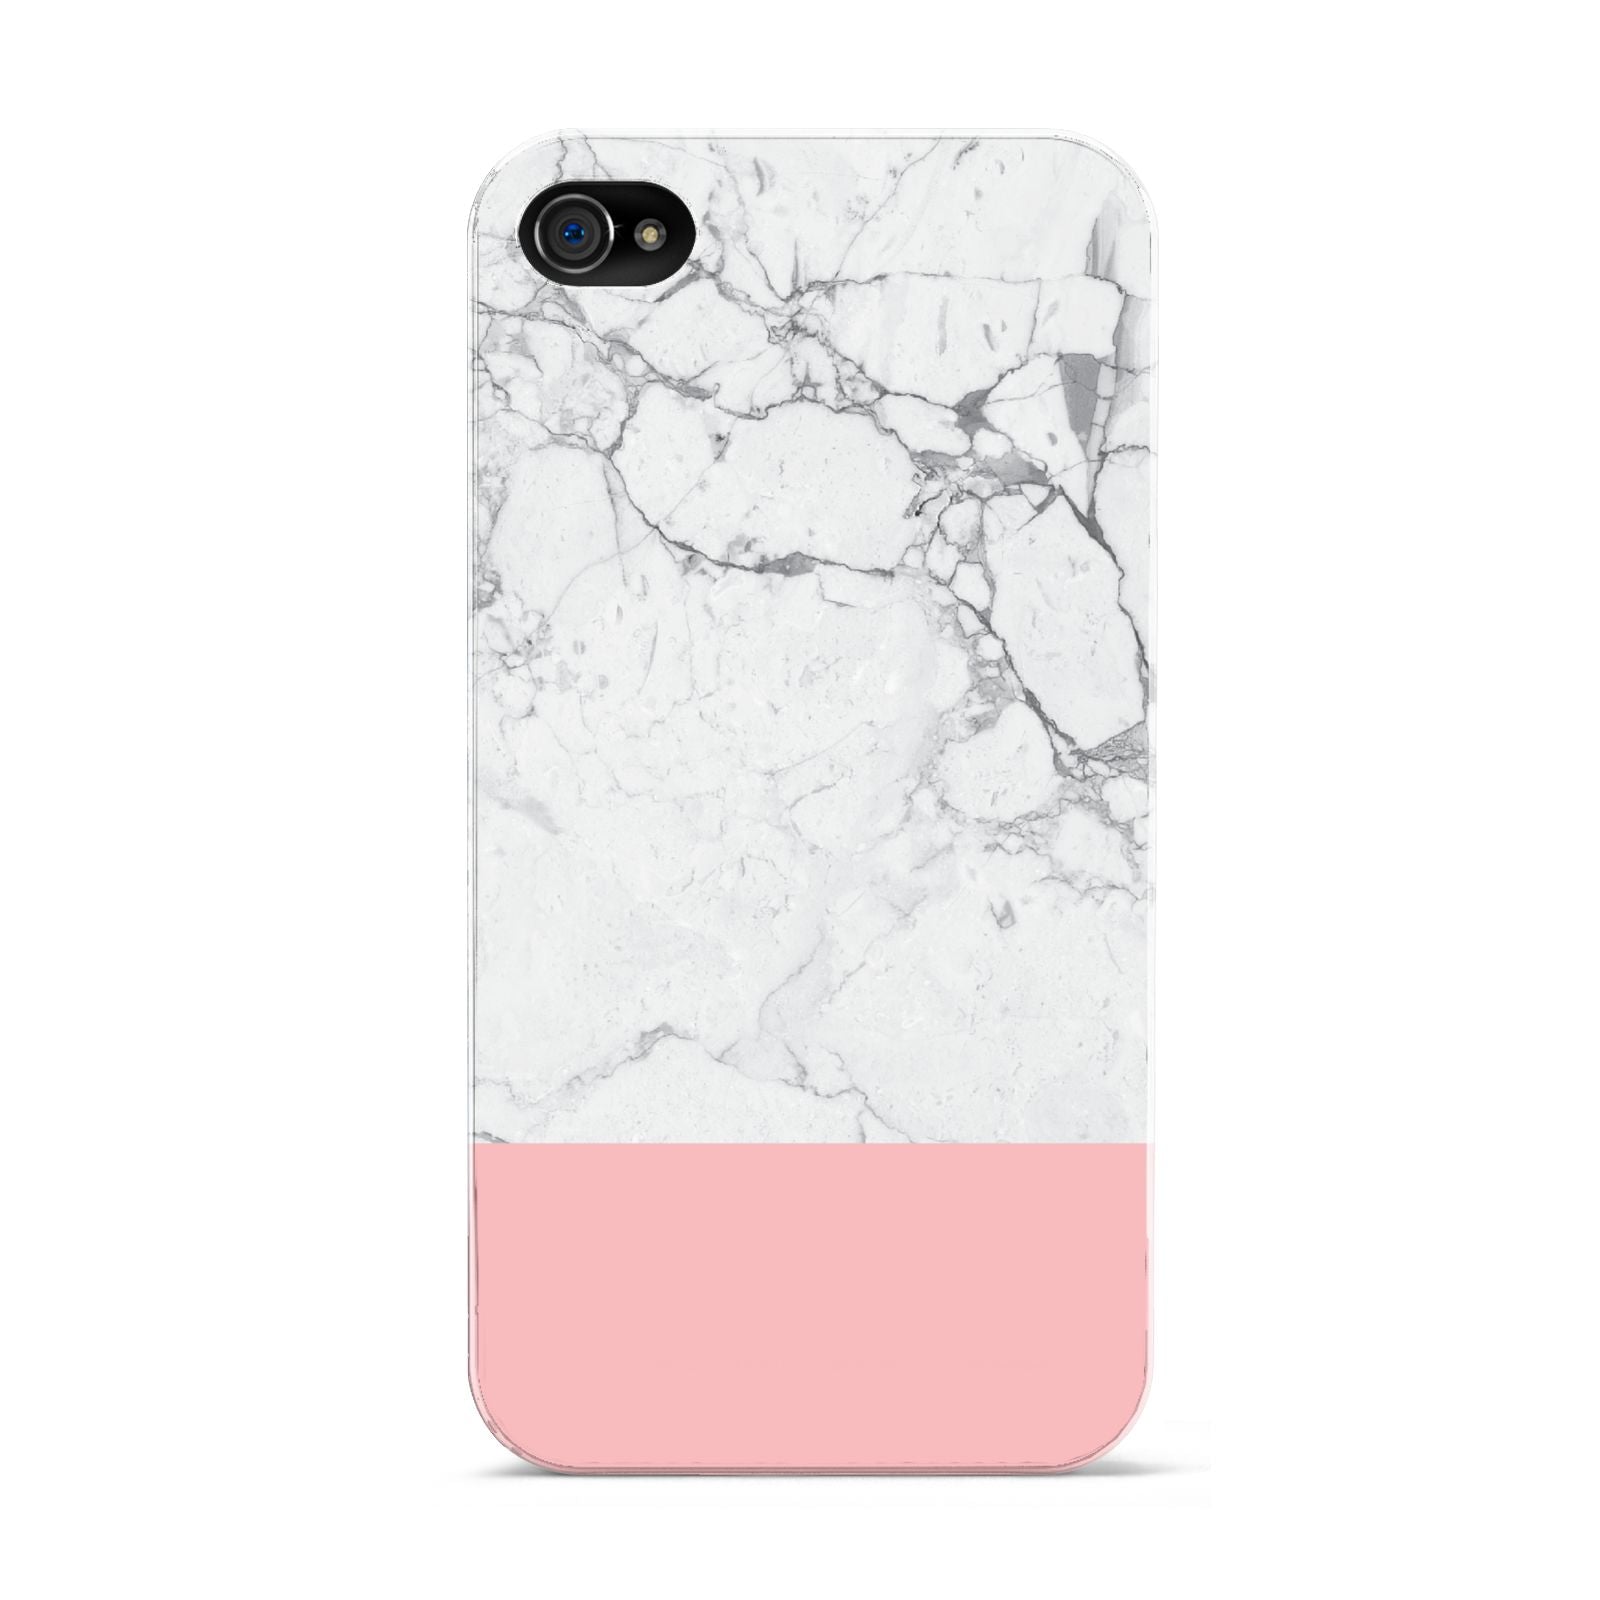 Marble White Carrara Pink Apple iPhone 4s Case